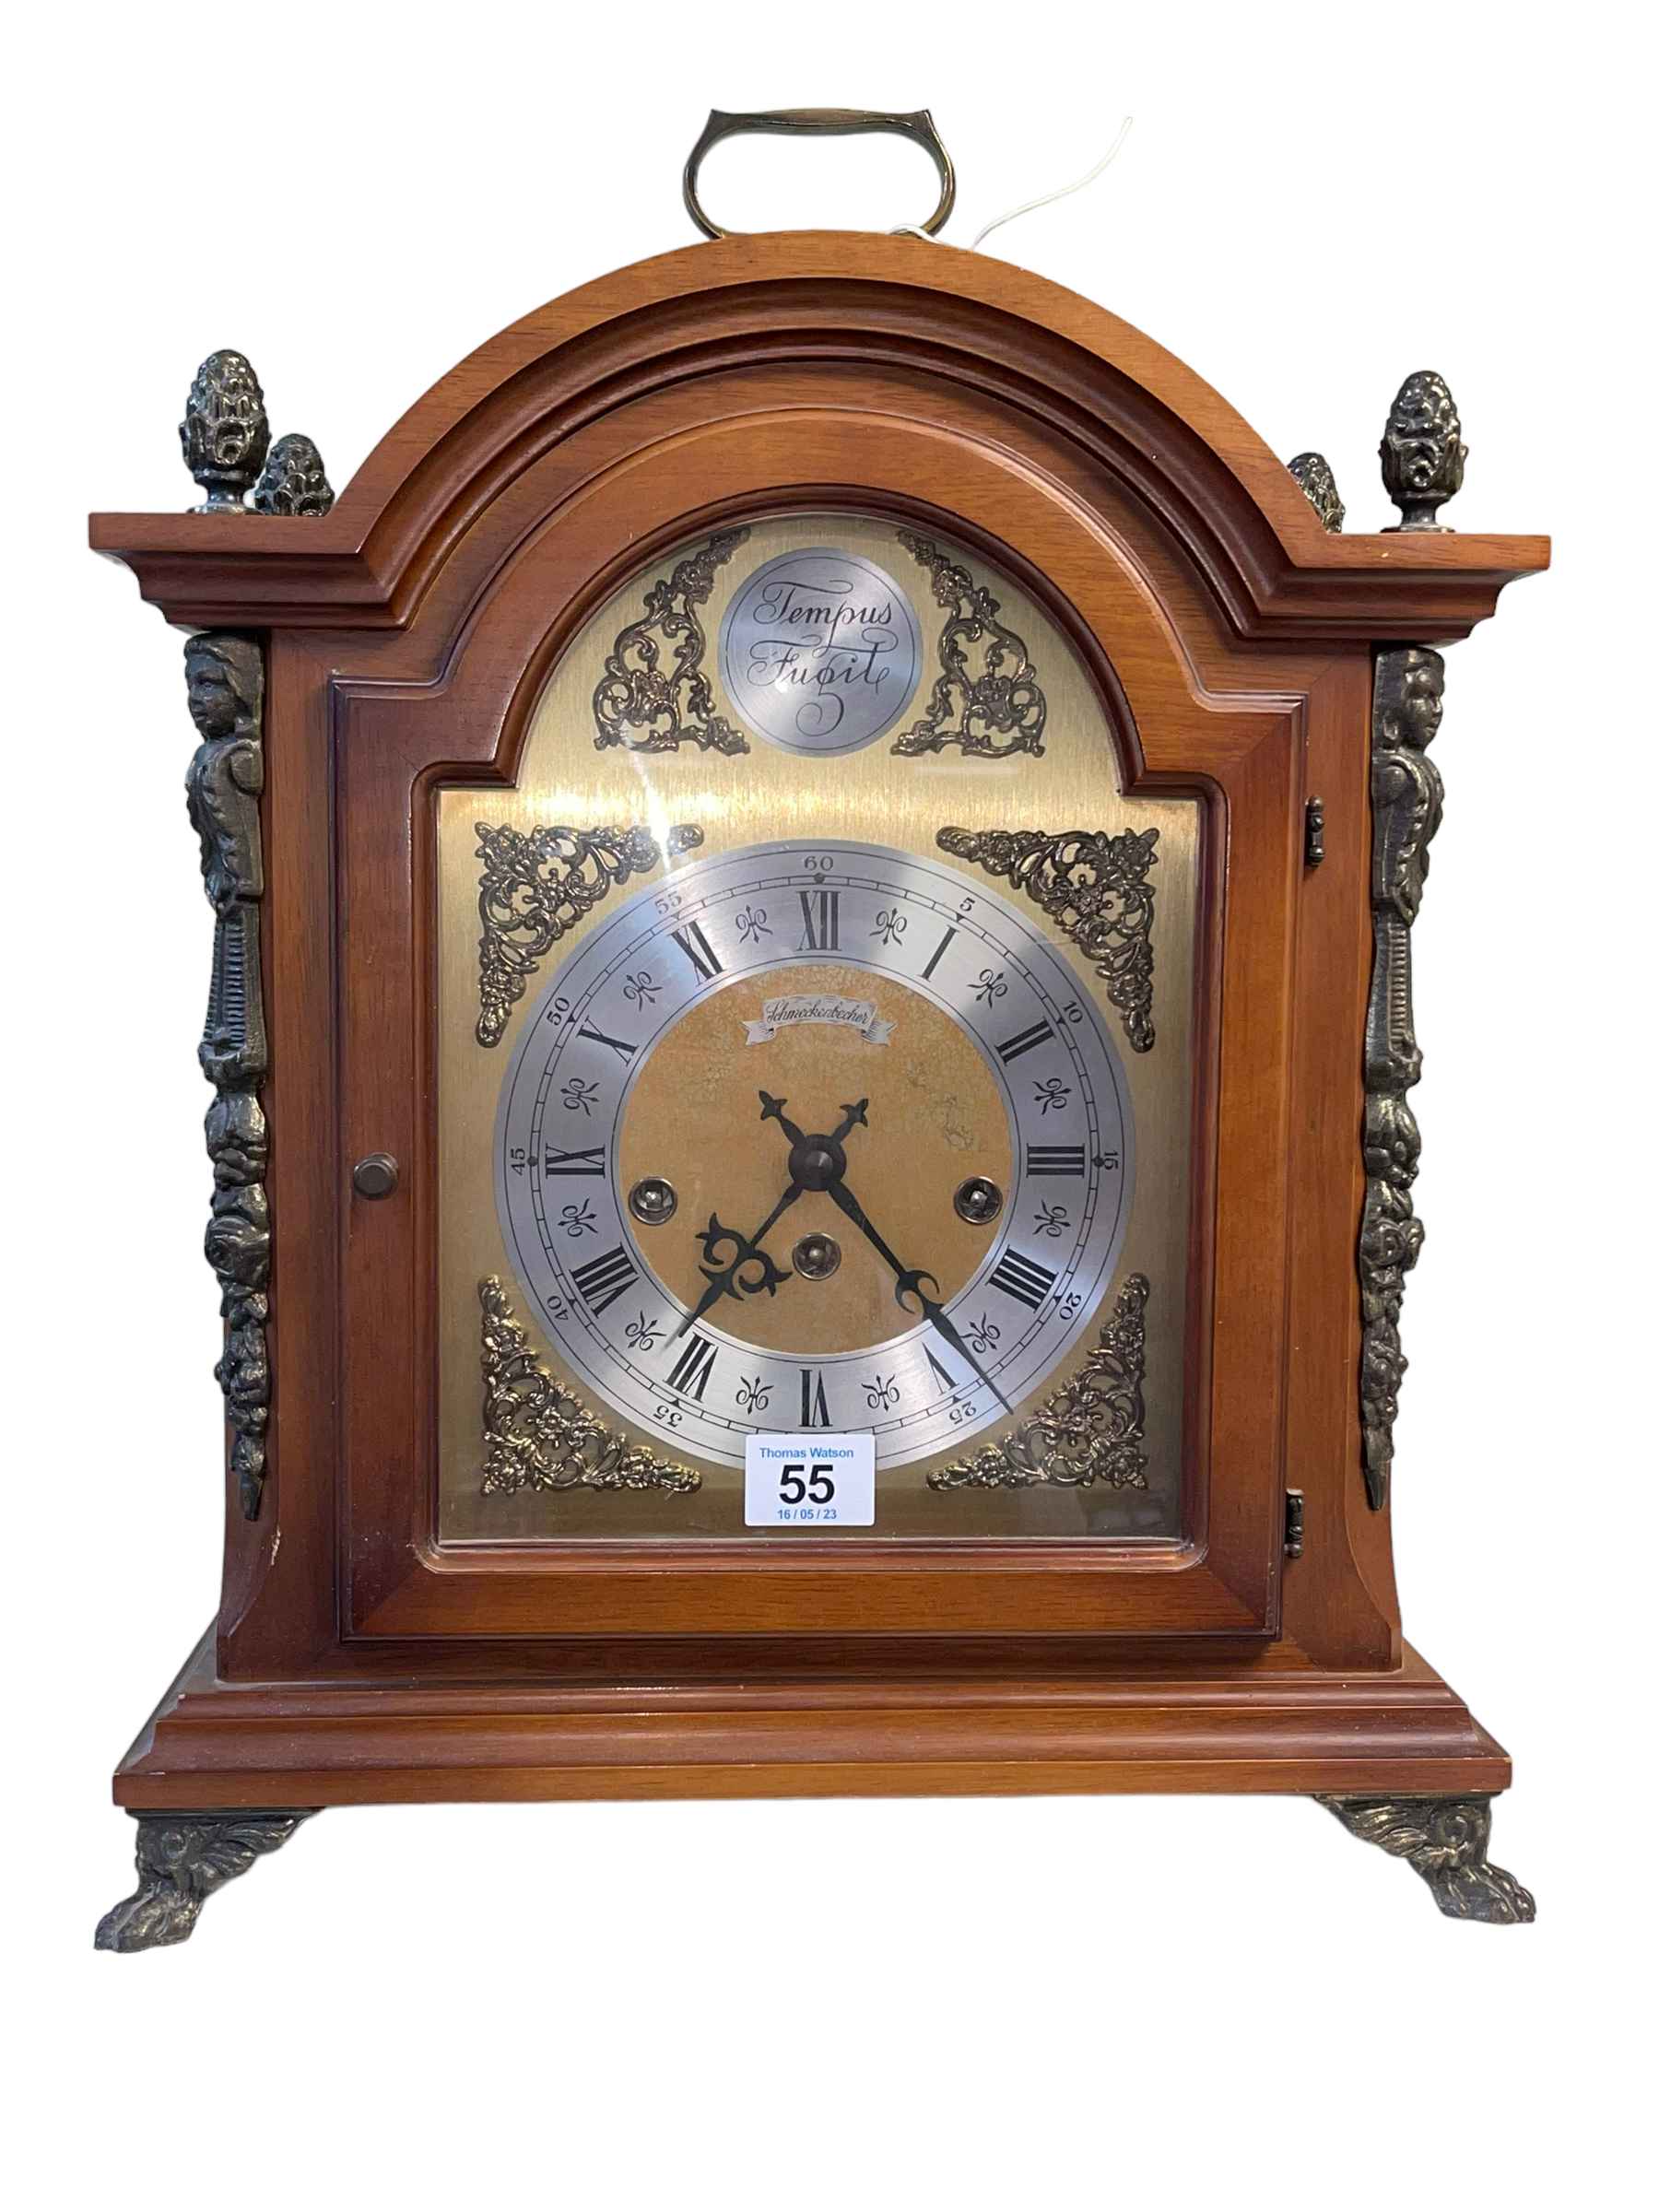 Mahogany cased bracket clock with silver gilt dial, 45cm high.